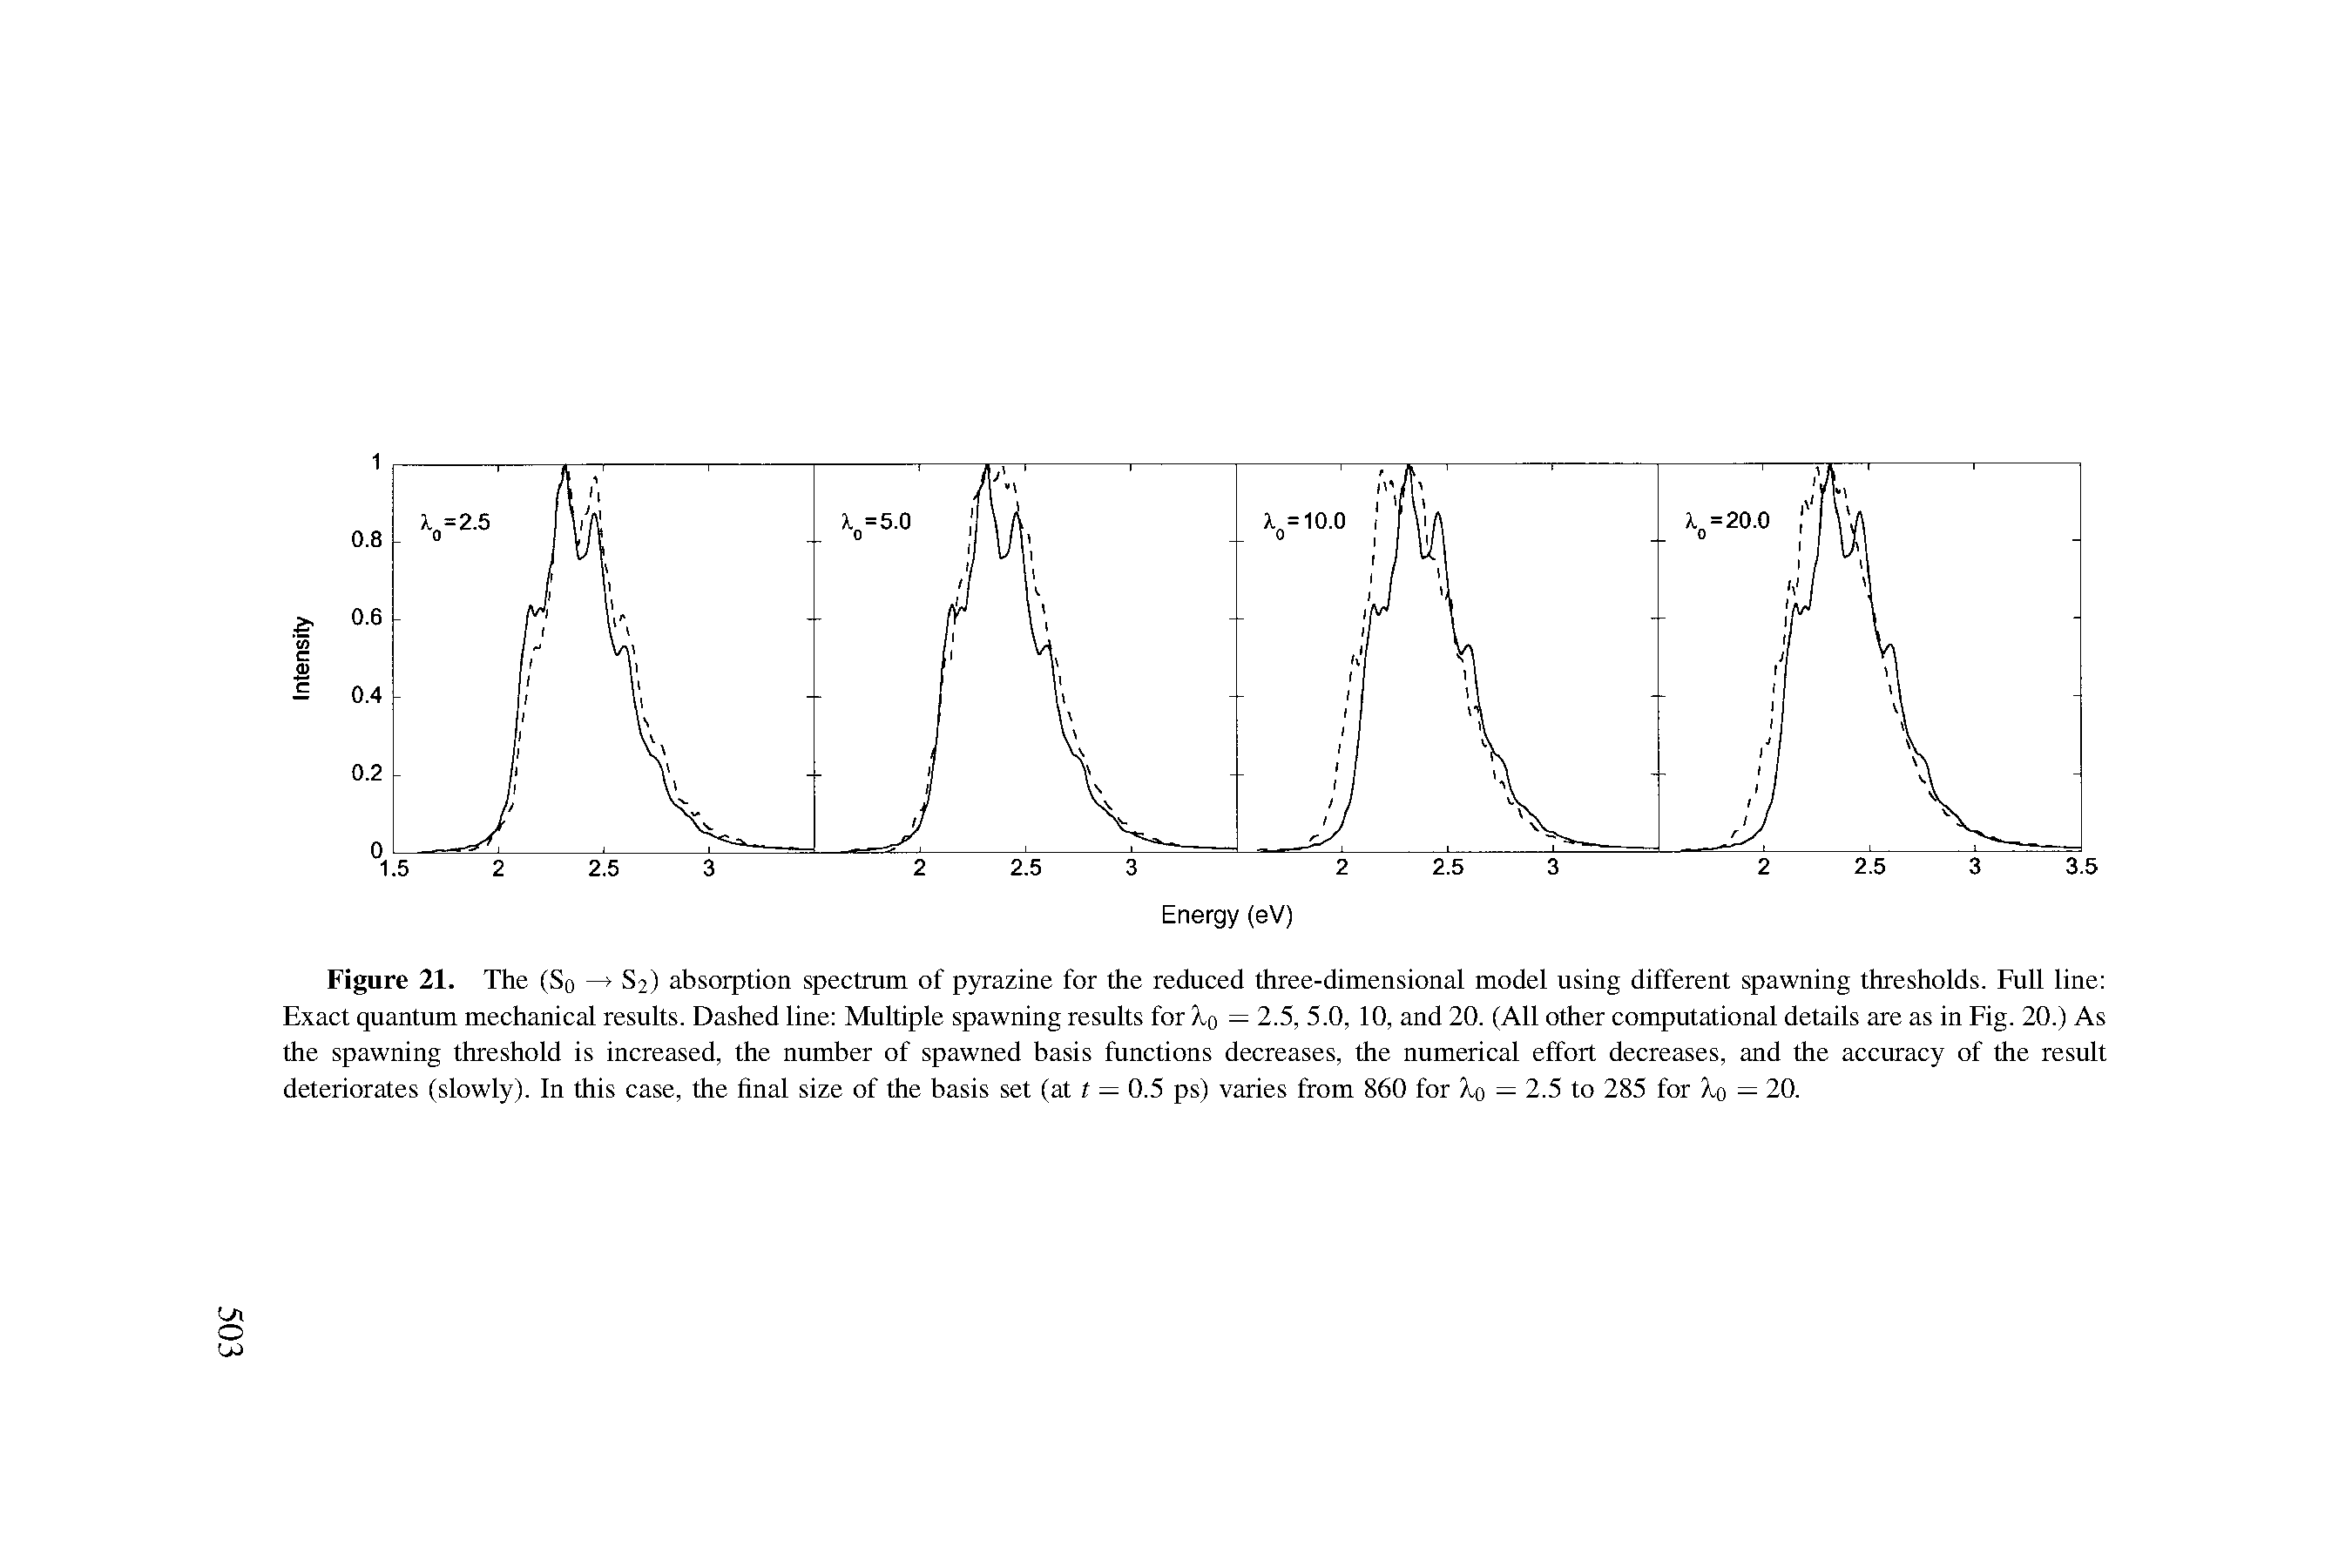 Figure 21. The (So — S2) absorption spectrum of pyrazine for the reduced three-dimensional model using different spawning thresholds. Full line Exact quantum mechanical results. Dashed line Multiple spawning results for — 2.5, 5.0, 10, and 20. (All other computational details are as in Fig. 20.) As the spawning threshold is increased, the number of spawned basis functions decreases, the numerical effort decreases, and the accuracy of the result deteriorates (slowly). In this case, the final size of the basis set (at t — 0.5 ps) varies from 860 for 0 = 2.5 to 285 for 0 = 20.